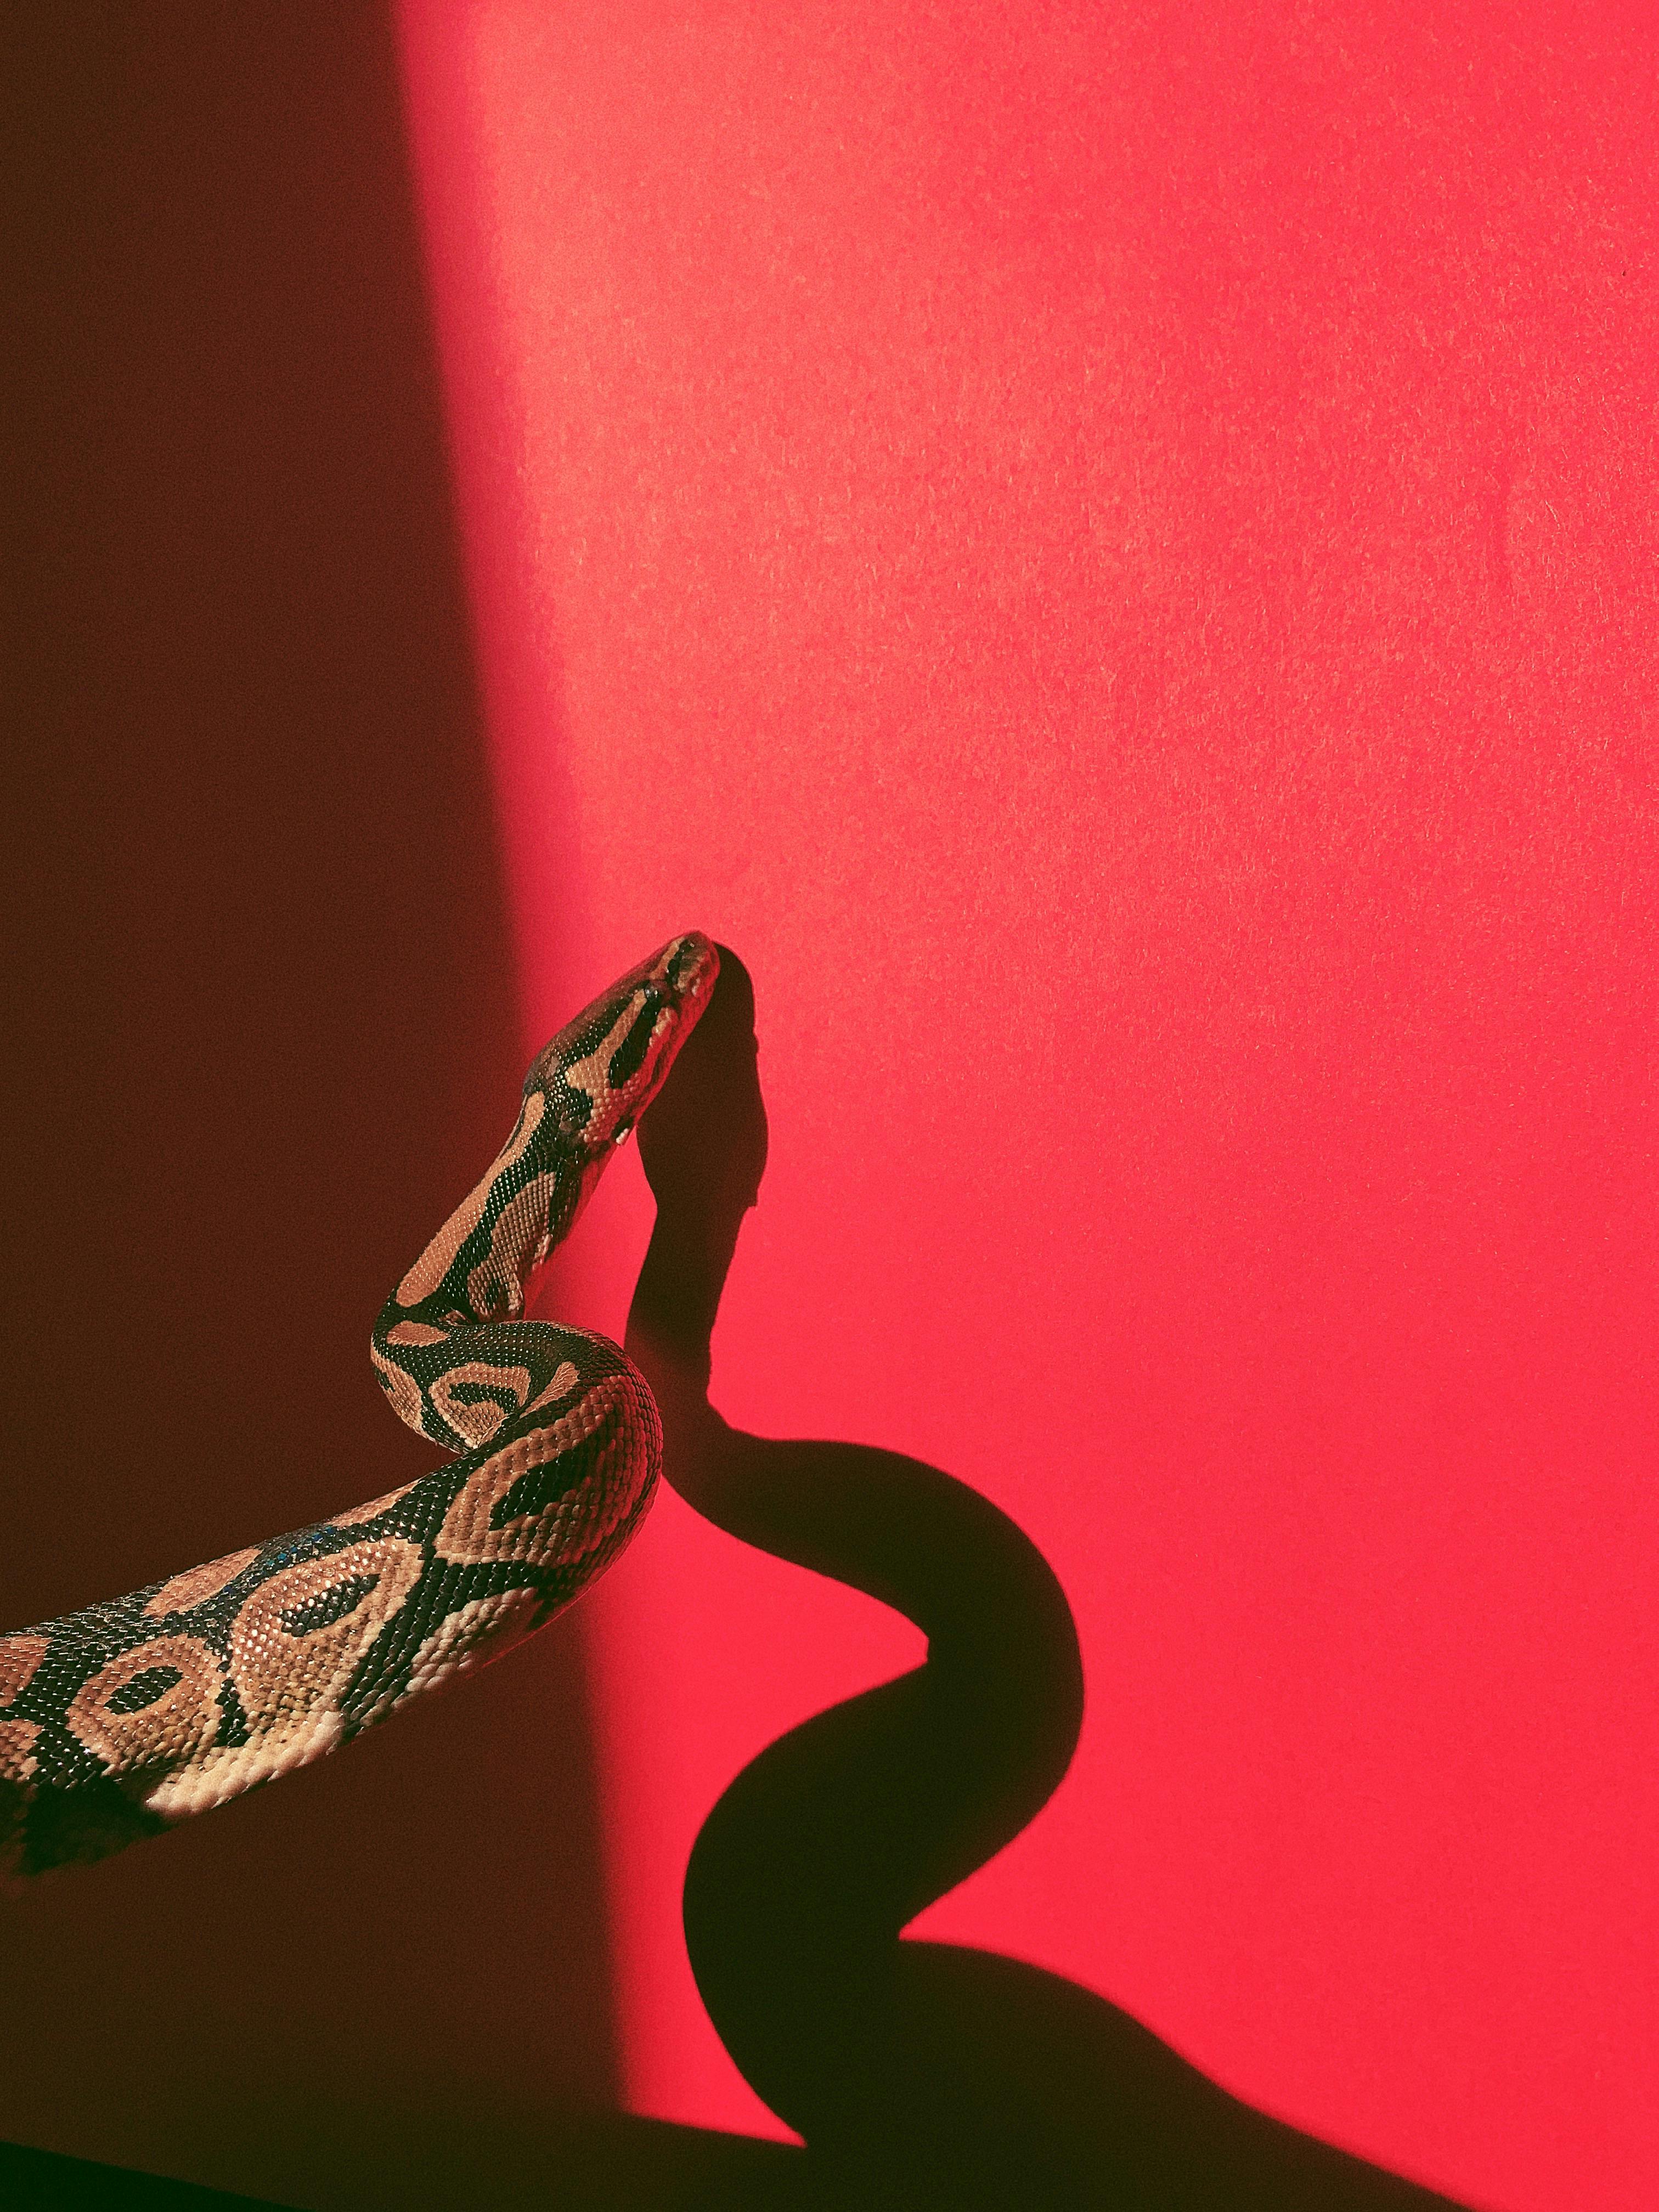 Wallpaper Serpent, Colubrid Snakes, Light, Red, Synthetic Rubber,  Background - Download Free Image